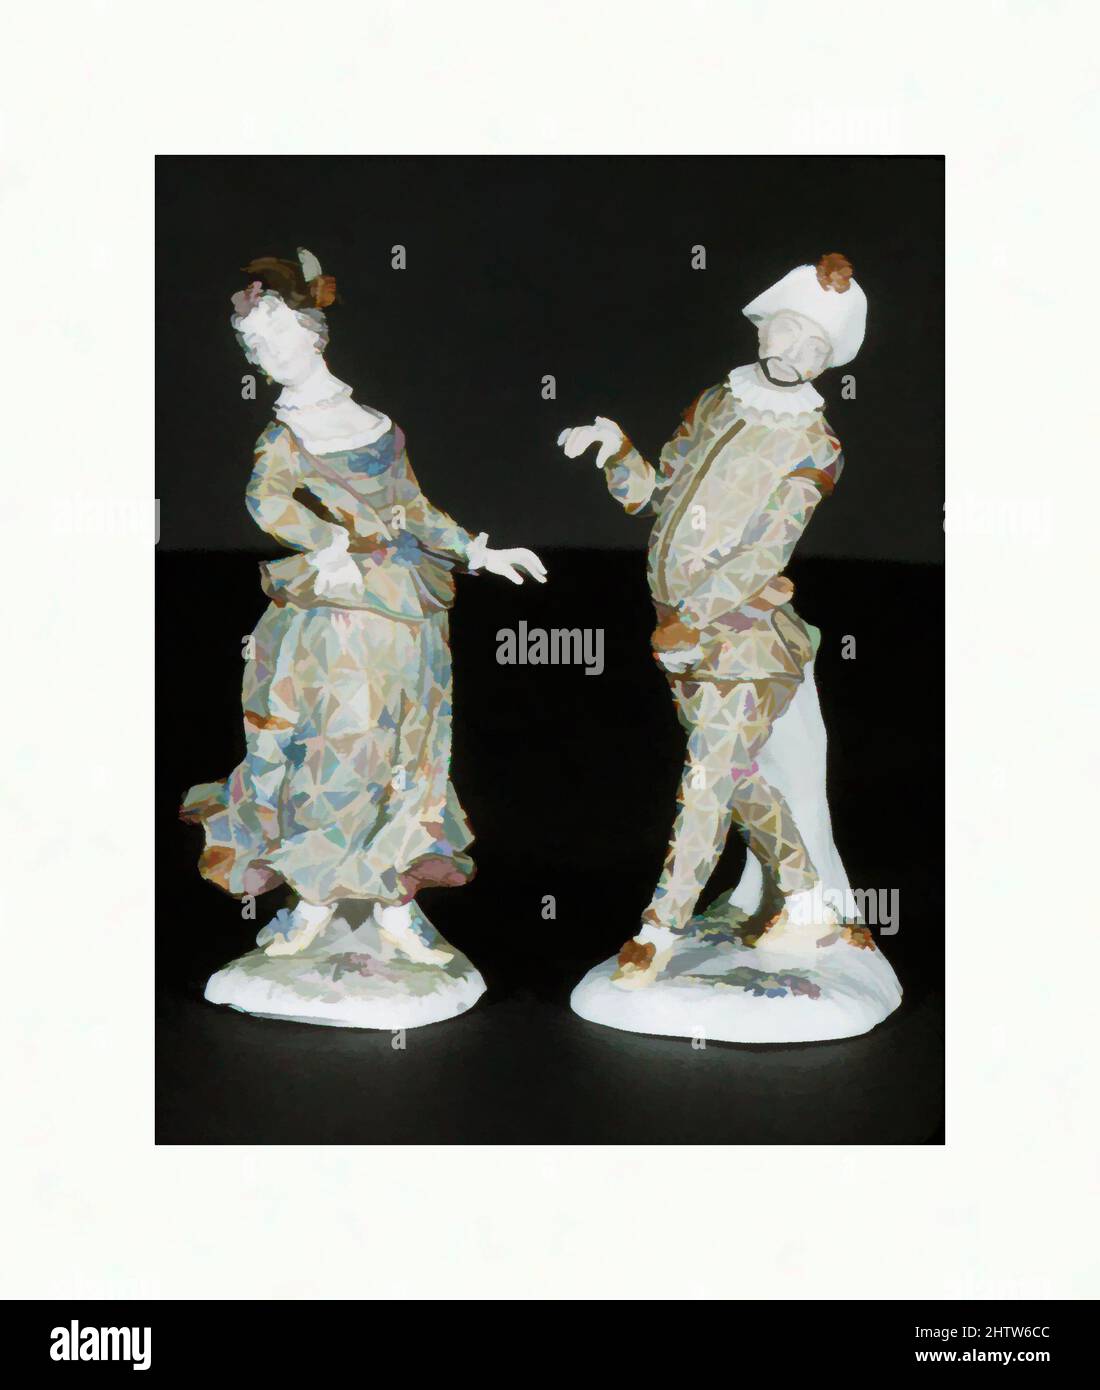 Art inspired by Harlequin (one of a pair), ca. 1753–54, German, Fürstenberg, Hard-paste porcelain, Height: 7 1/2 in. (19.1 cm), Ceramics-Porcelain, Classic works modernized by Artotop with a splash of modernity. Shapes, color and value, eye-catching visual impact on art. Emotions through freedom of artworks in a contemporary way. A timeless message pursuing a wildly creative new direction. Artists turning to the digital medium and creating the Artotop NFT Stock Photo